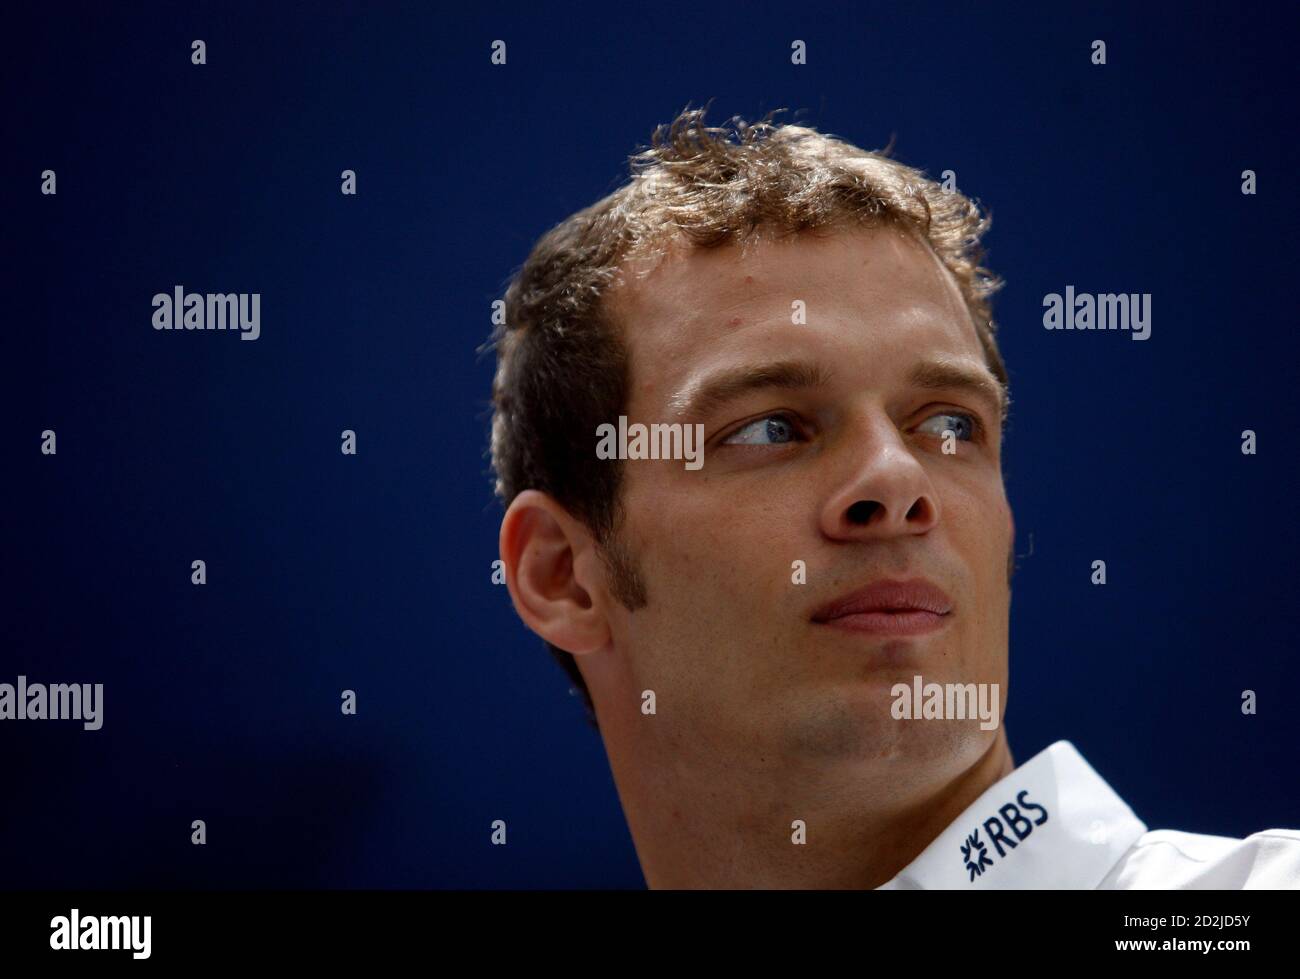 Williams Formula One (F1) driver Alex Wurz of Austria attends a news conference during the Grand Prix Challenge in Singapore April 4, 2007. Singapore is the second city in the world to hose the Grand Prix Challenge, in which members of the public compete on a simulator to attain the best lap times on a simulated circuit. Three top participants from Singapore competed against Williams F1 drivers Narain Karthikeyan and Wurz during the grand finals on Wednesday.  REUTERS/Nicky Loh (SINGAPORE) Stock Photo